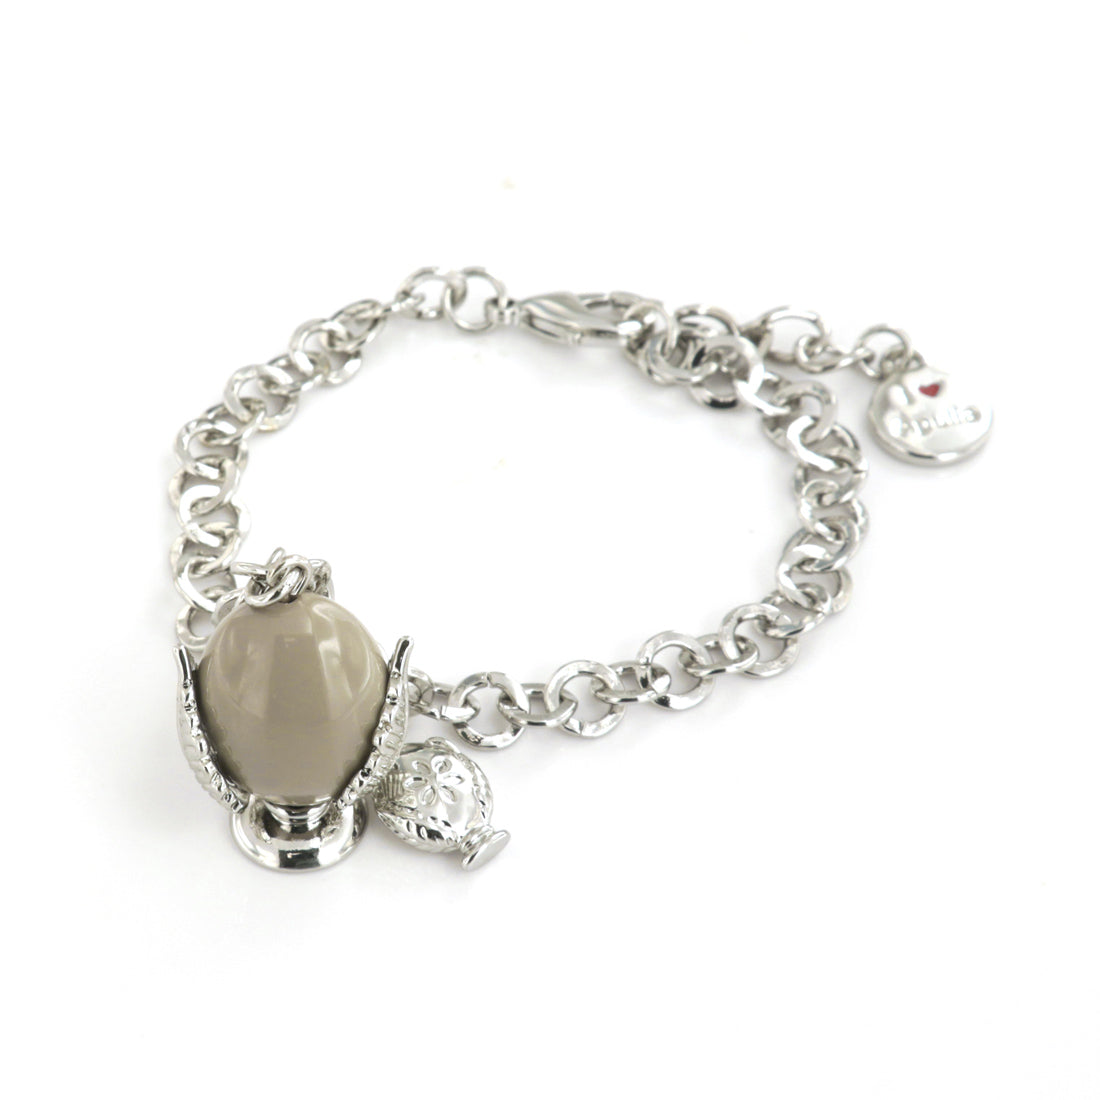 Metal bracelet with pendant Pugliese pumo, embellished with gray enamel and lateral mini pumo